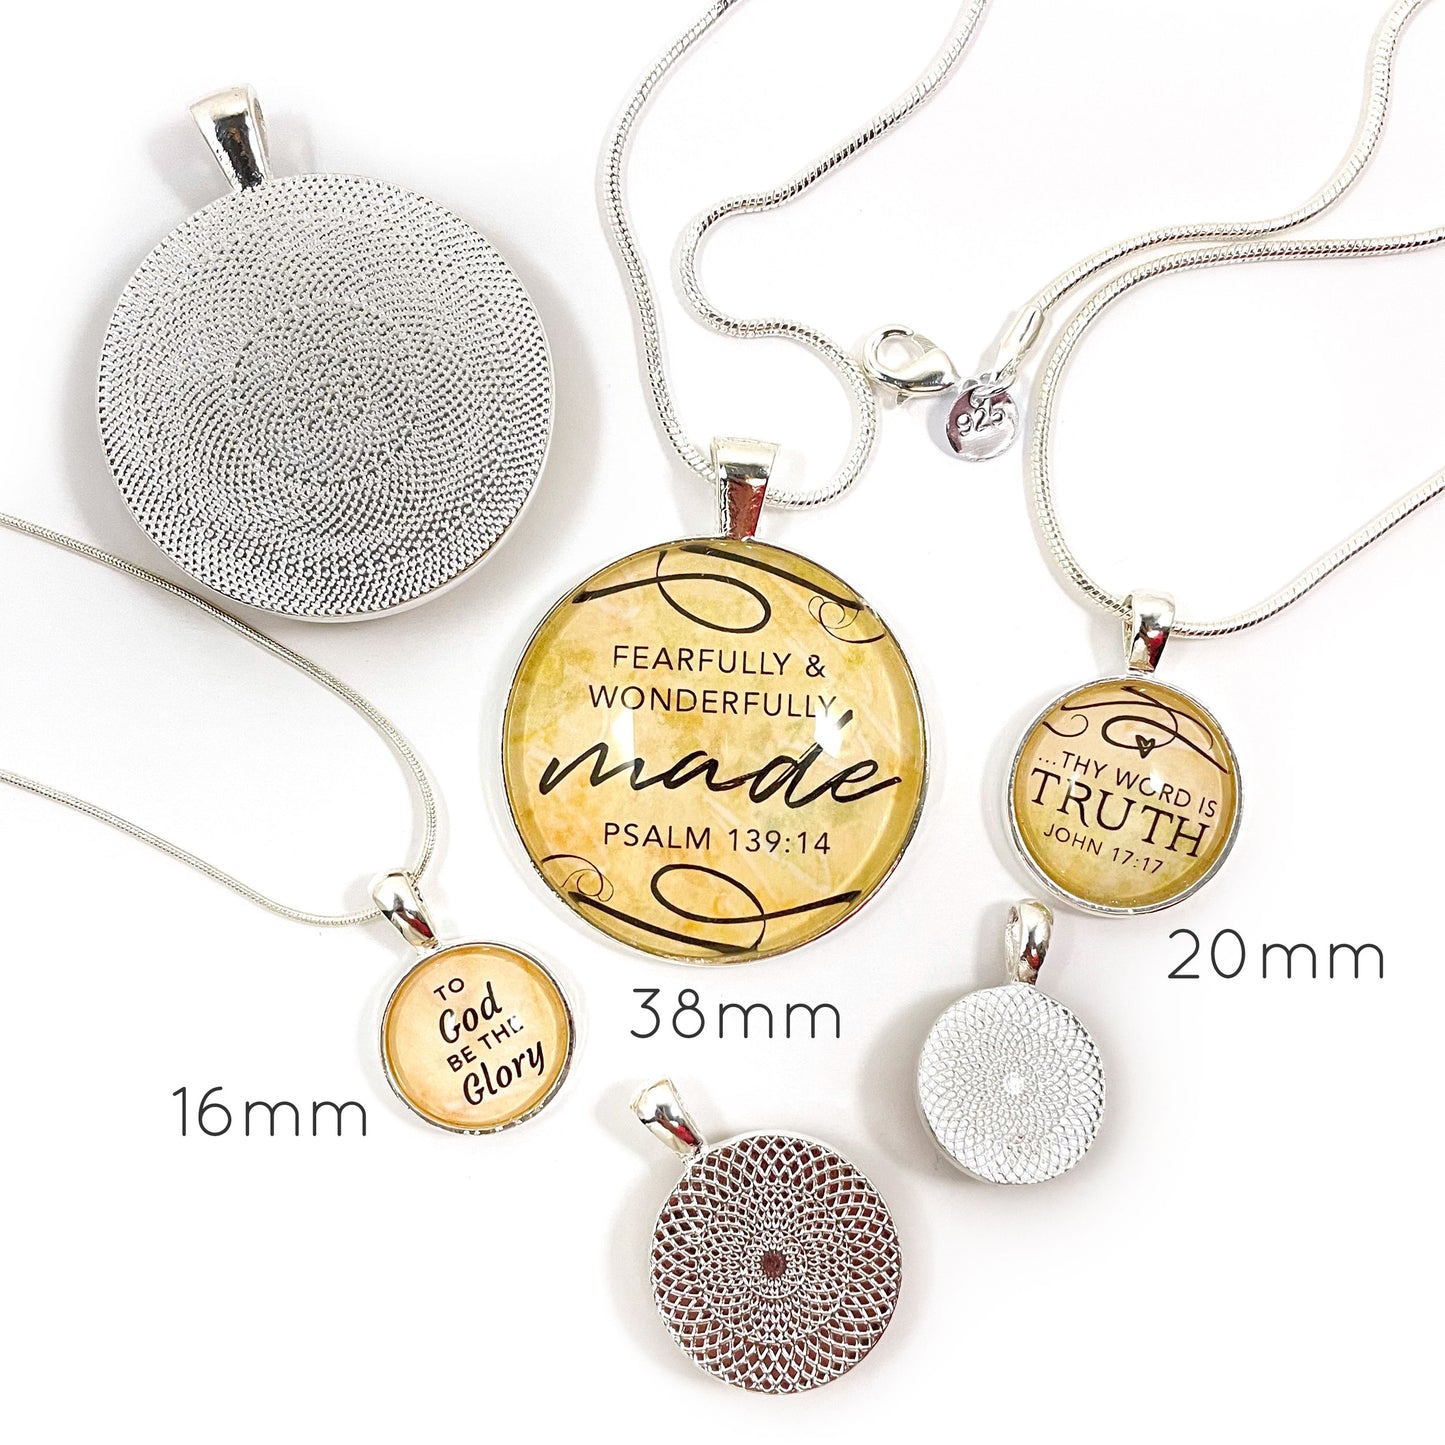 "I Am A Child of God" Christian Pendant Necklace – Silver-Plated